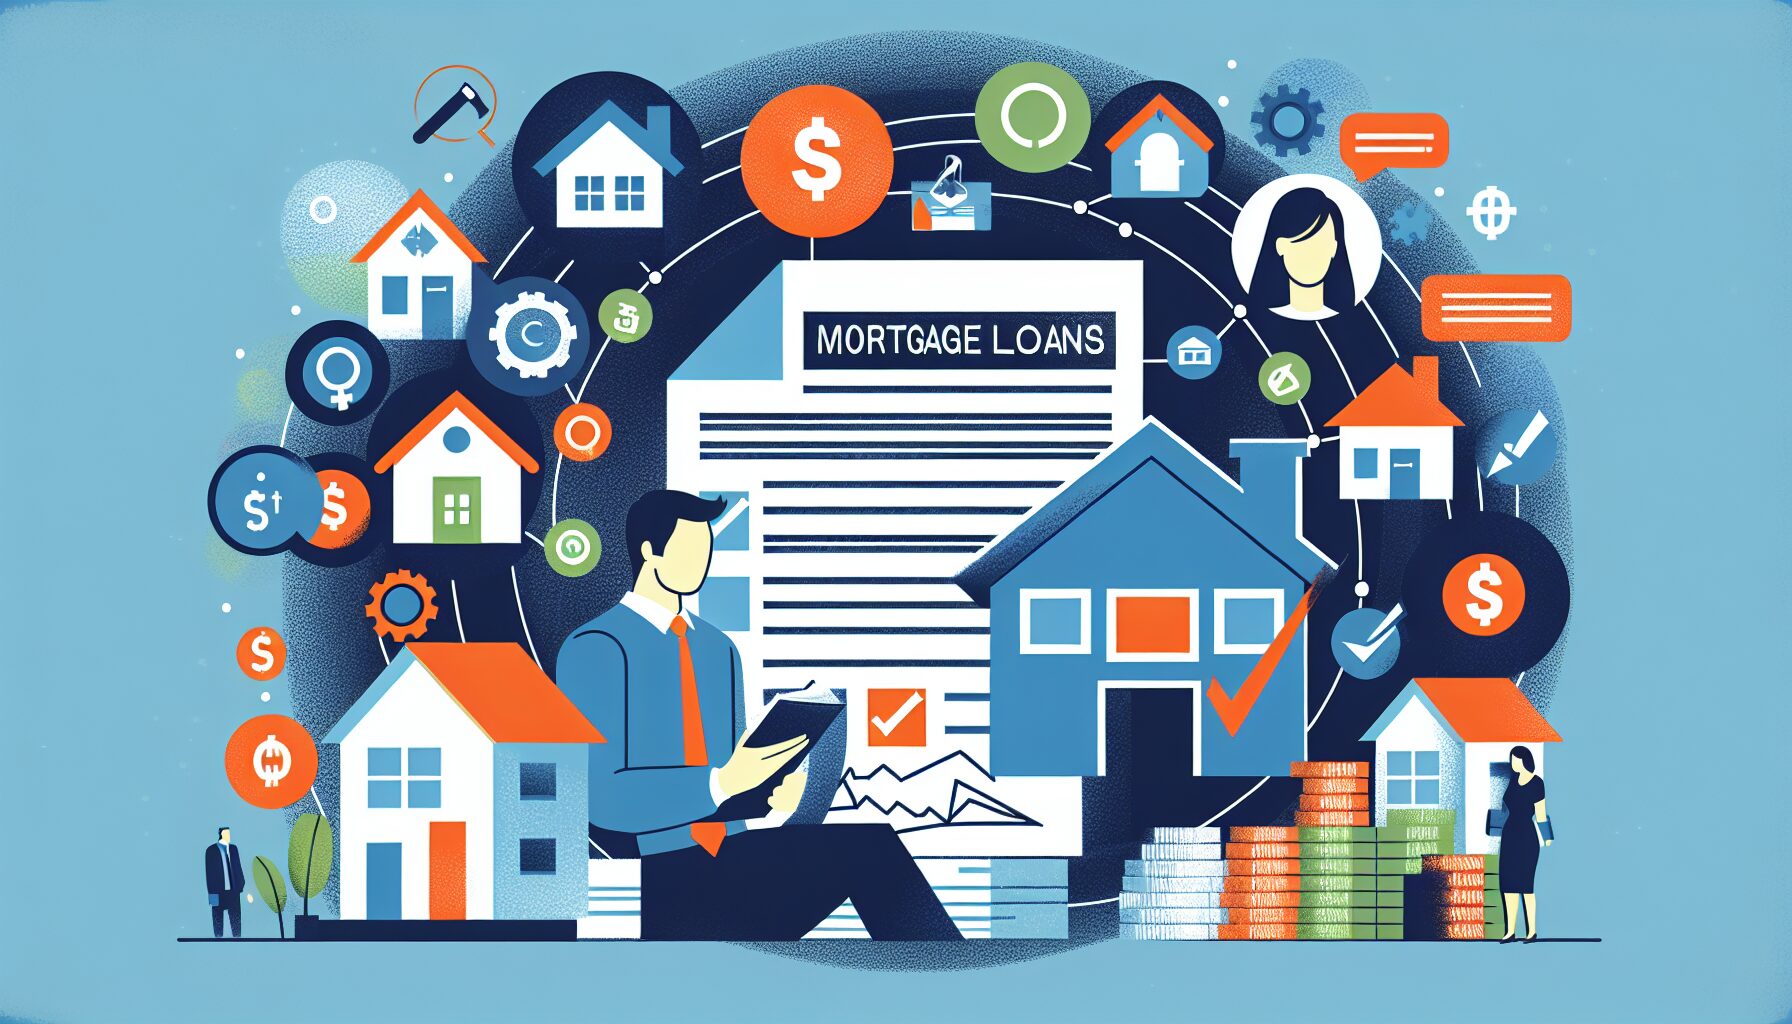 What Is Considered A Mortgage Loan?